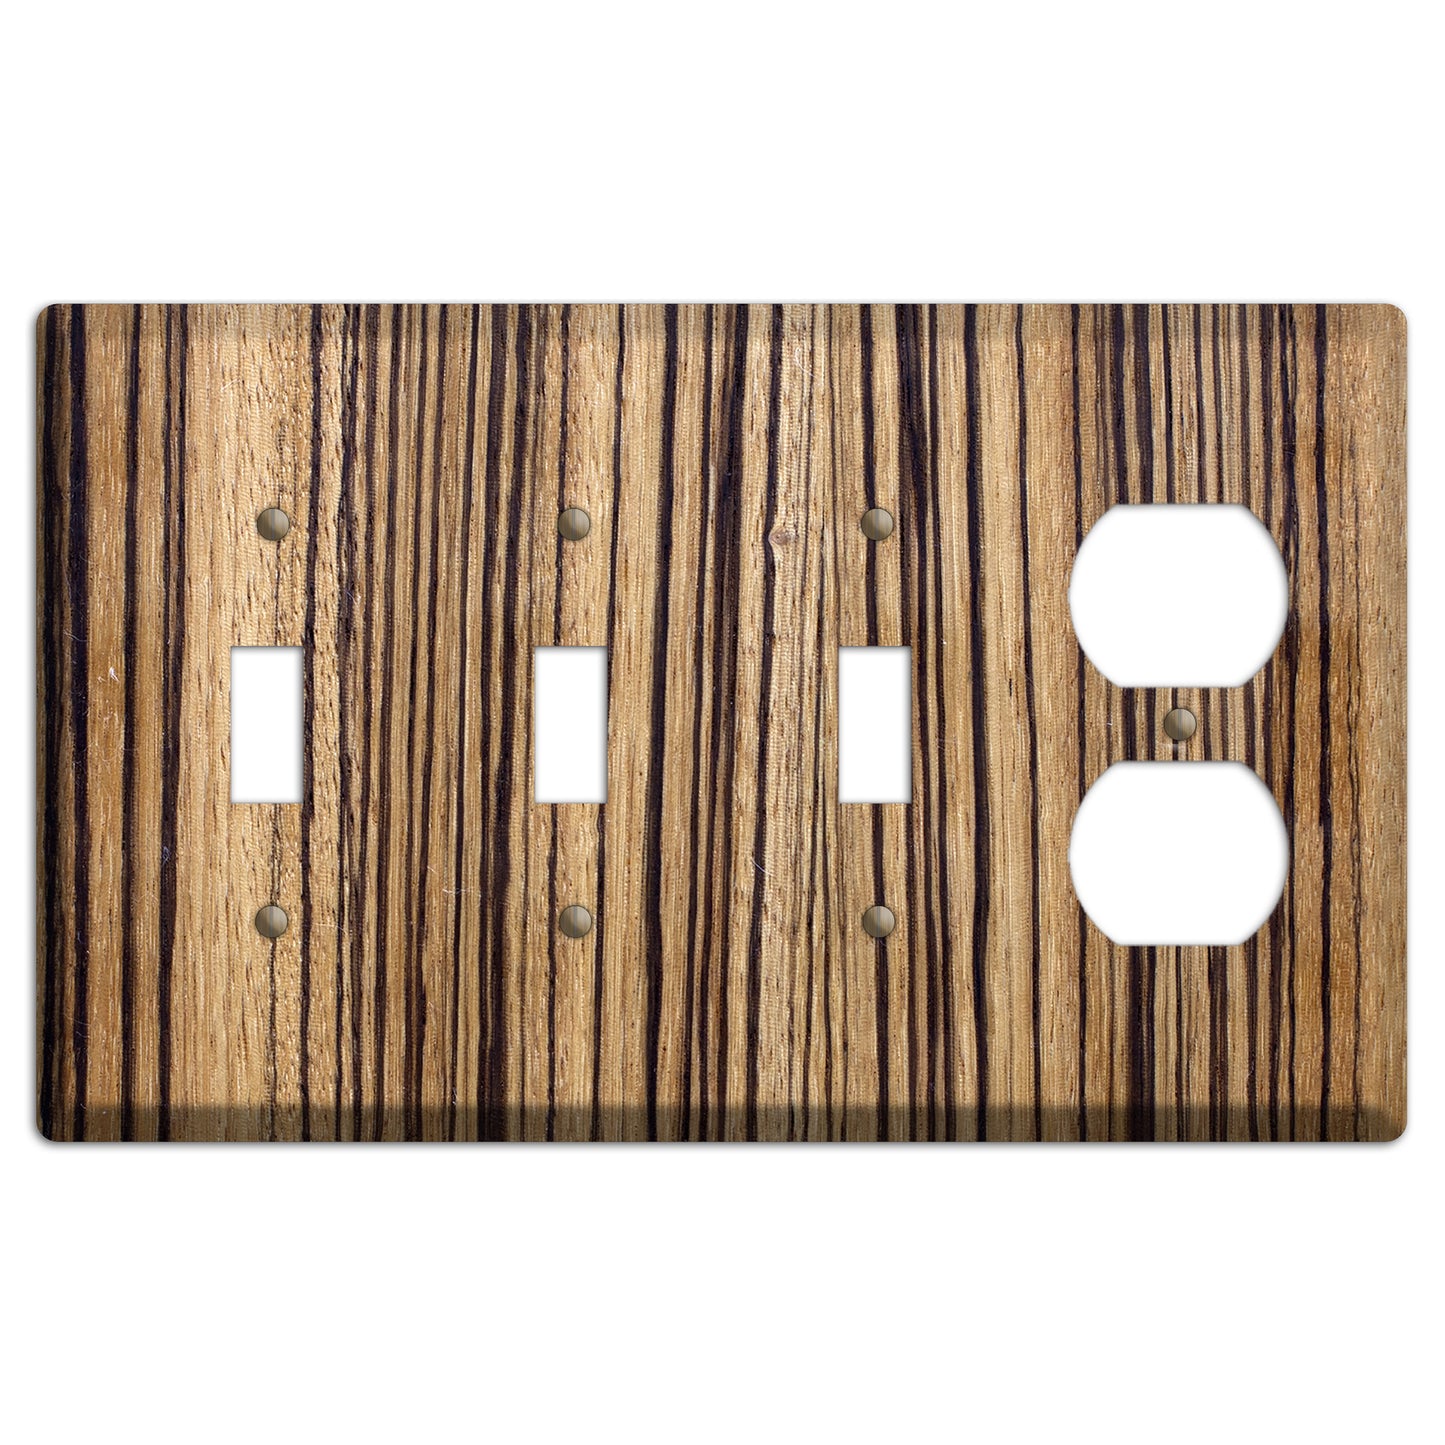 Zebrawood Wood 3 Toggle / Duplex Outlet Cover Plate